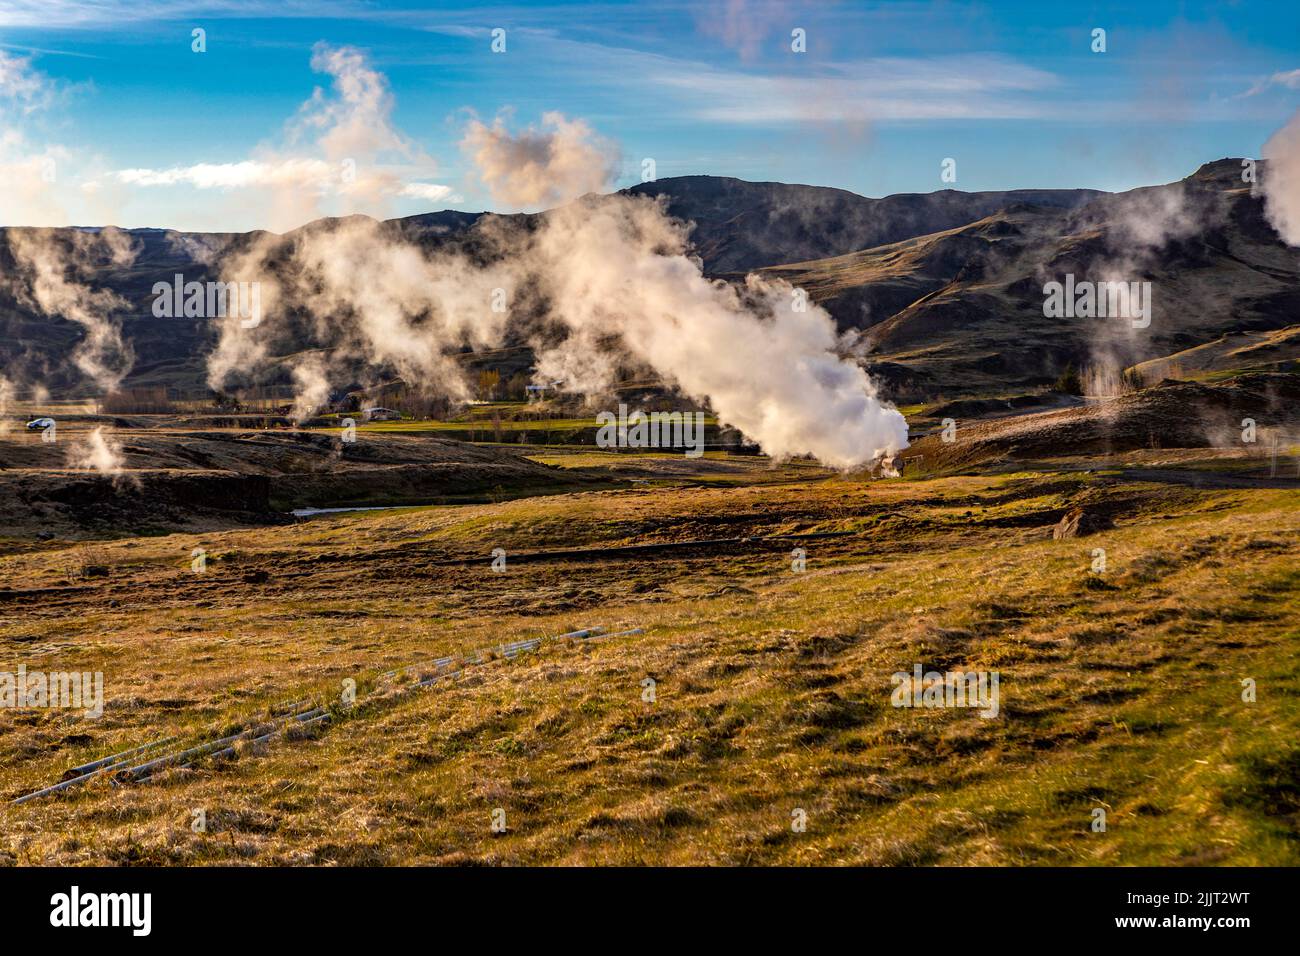 Geothermal steam coming fron vents in the ground near to Hveragerdi, Iceland Stock Photo